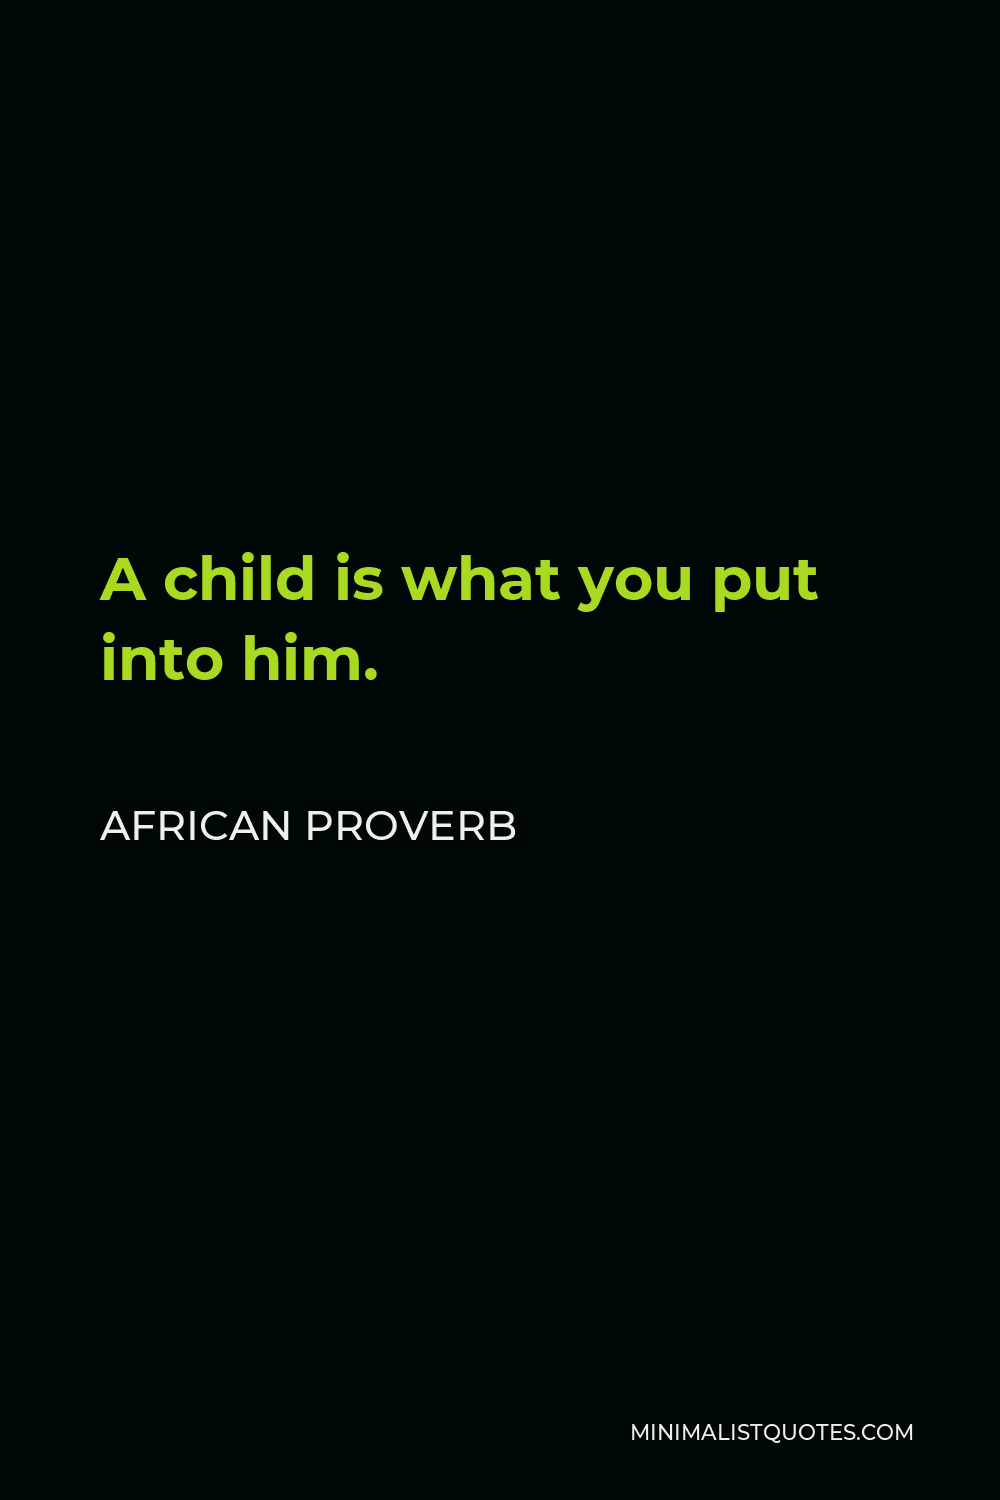 African Proverb Quote - A child is what you put into him.